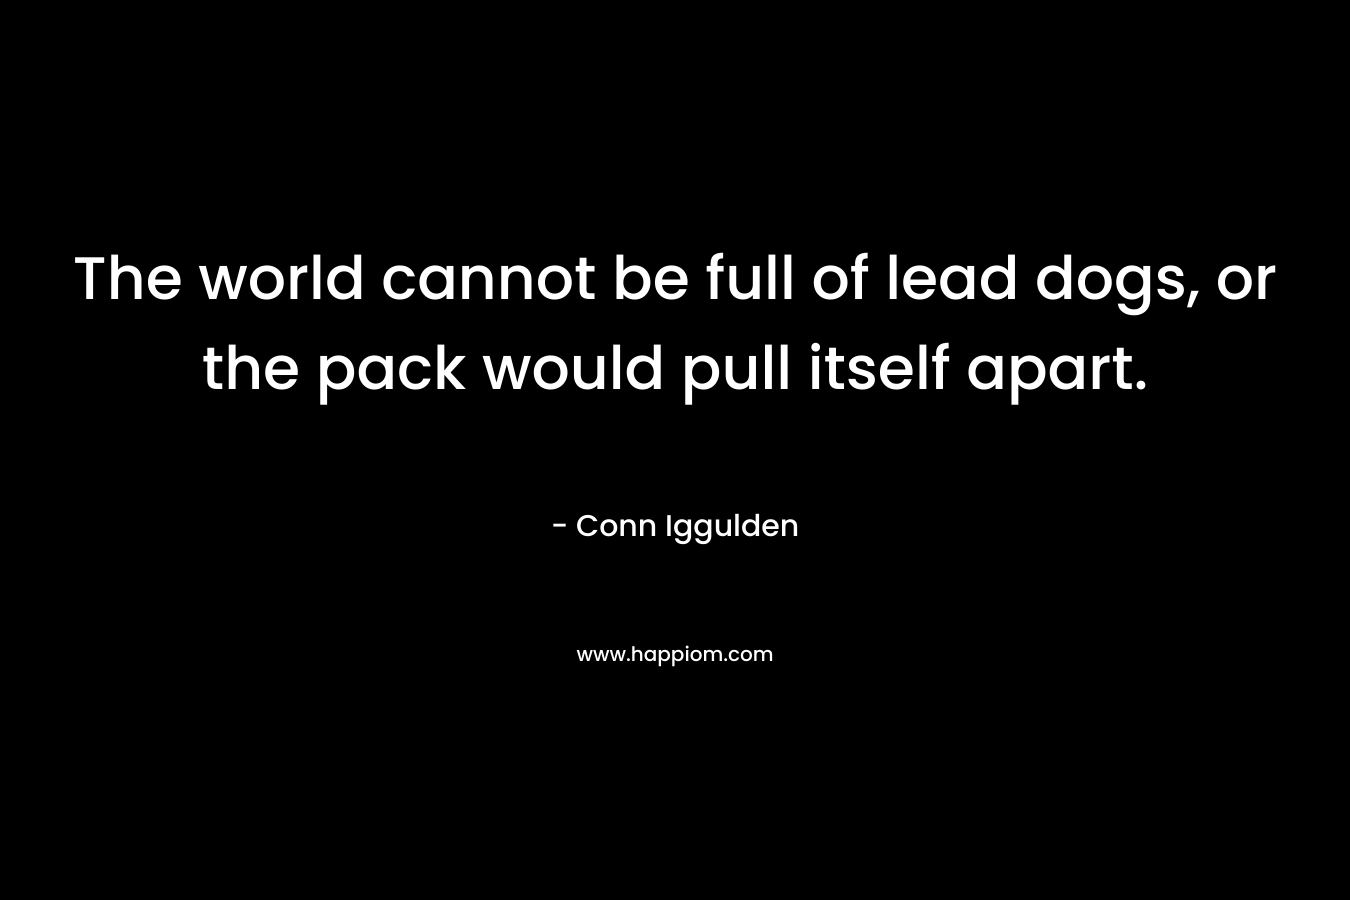 The world cannot be full of lead dogs, or the pack would pull itself apart.